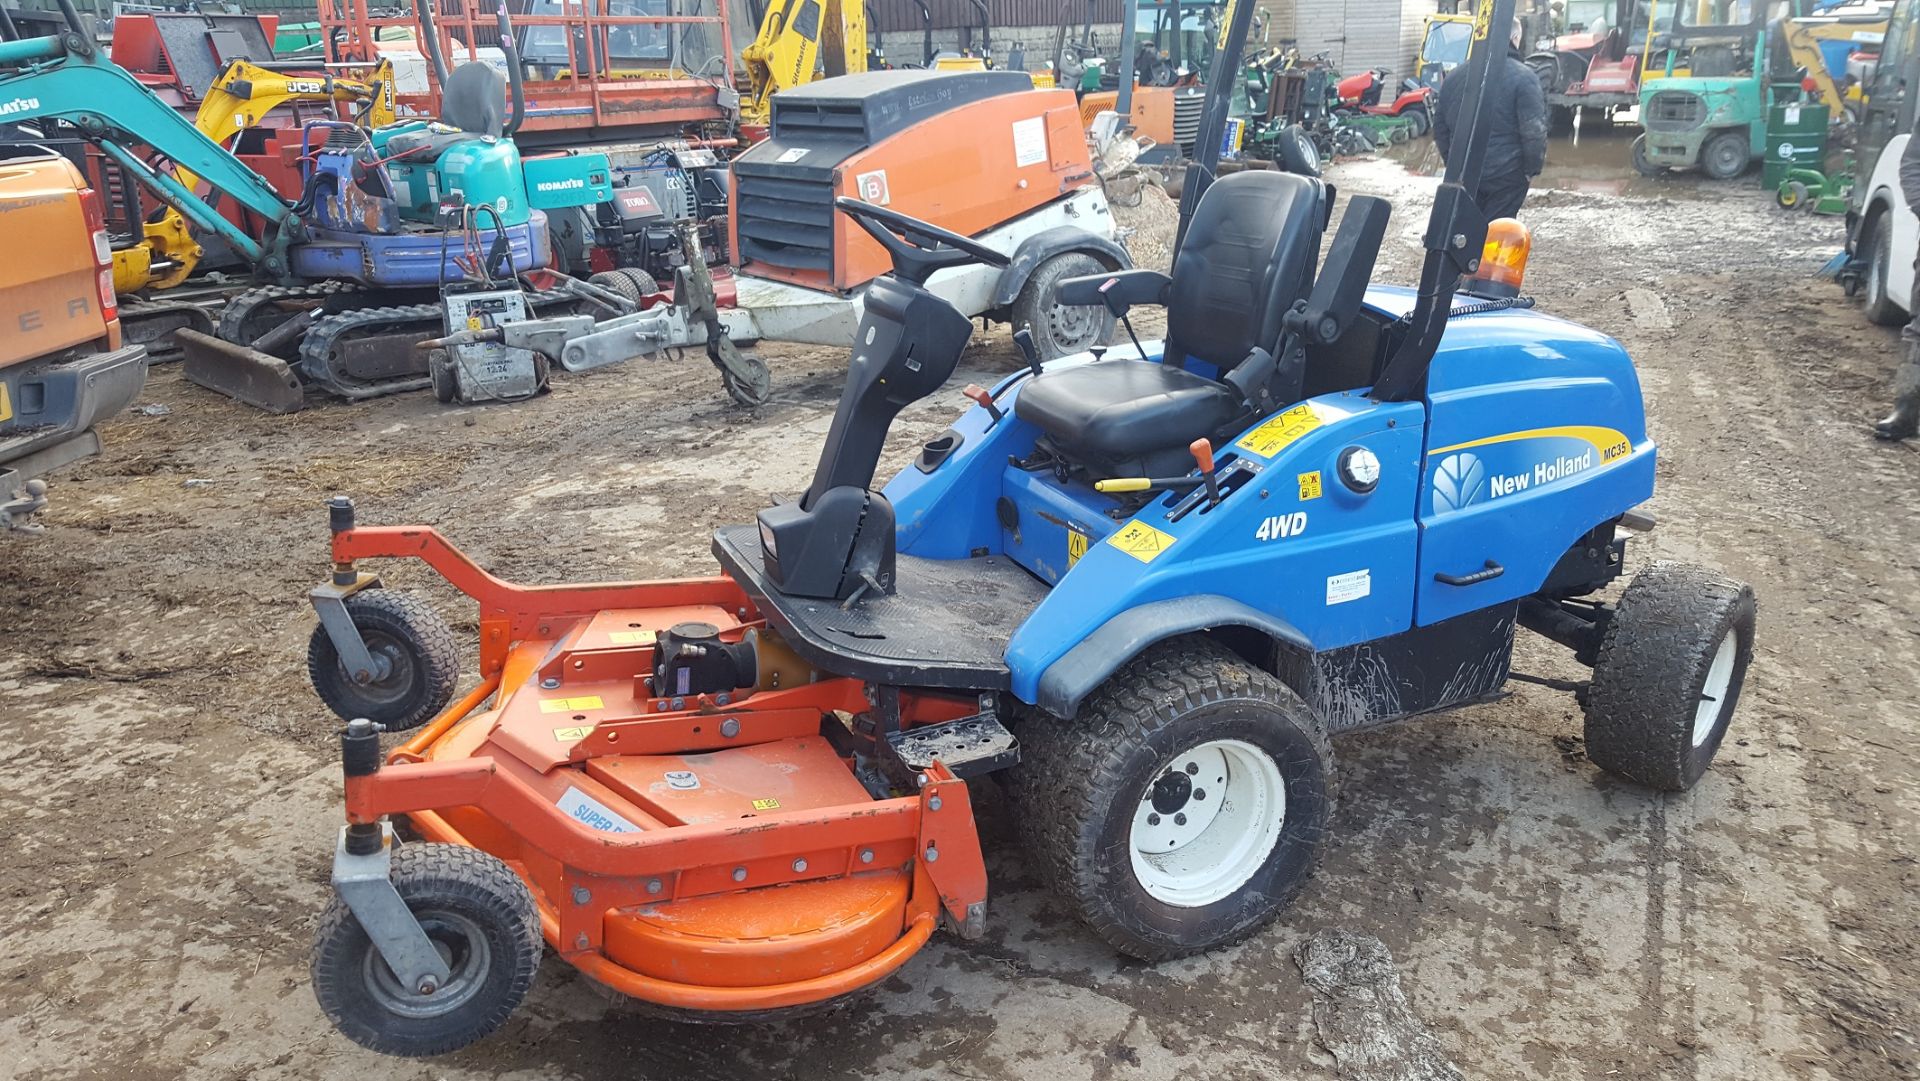 2010/60 REG NEW HOLLAND MC35 4WD RIDE ON LAWN MOWER LOW HOURS *PLUS VAT* - Image 2 of 7